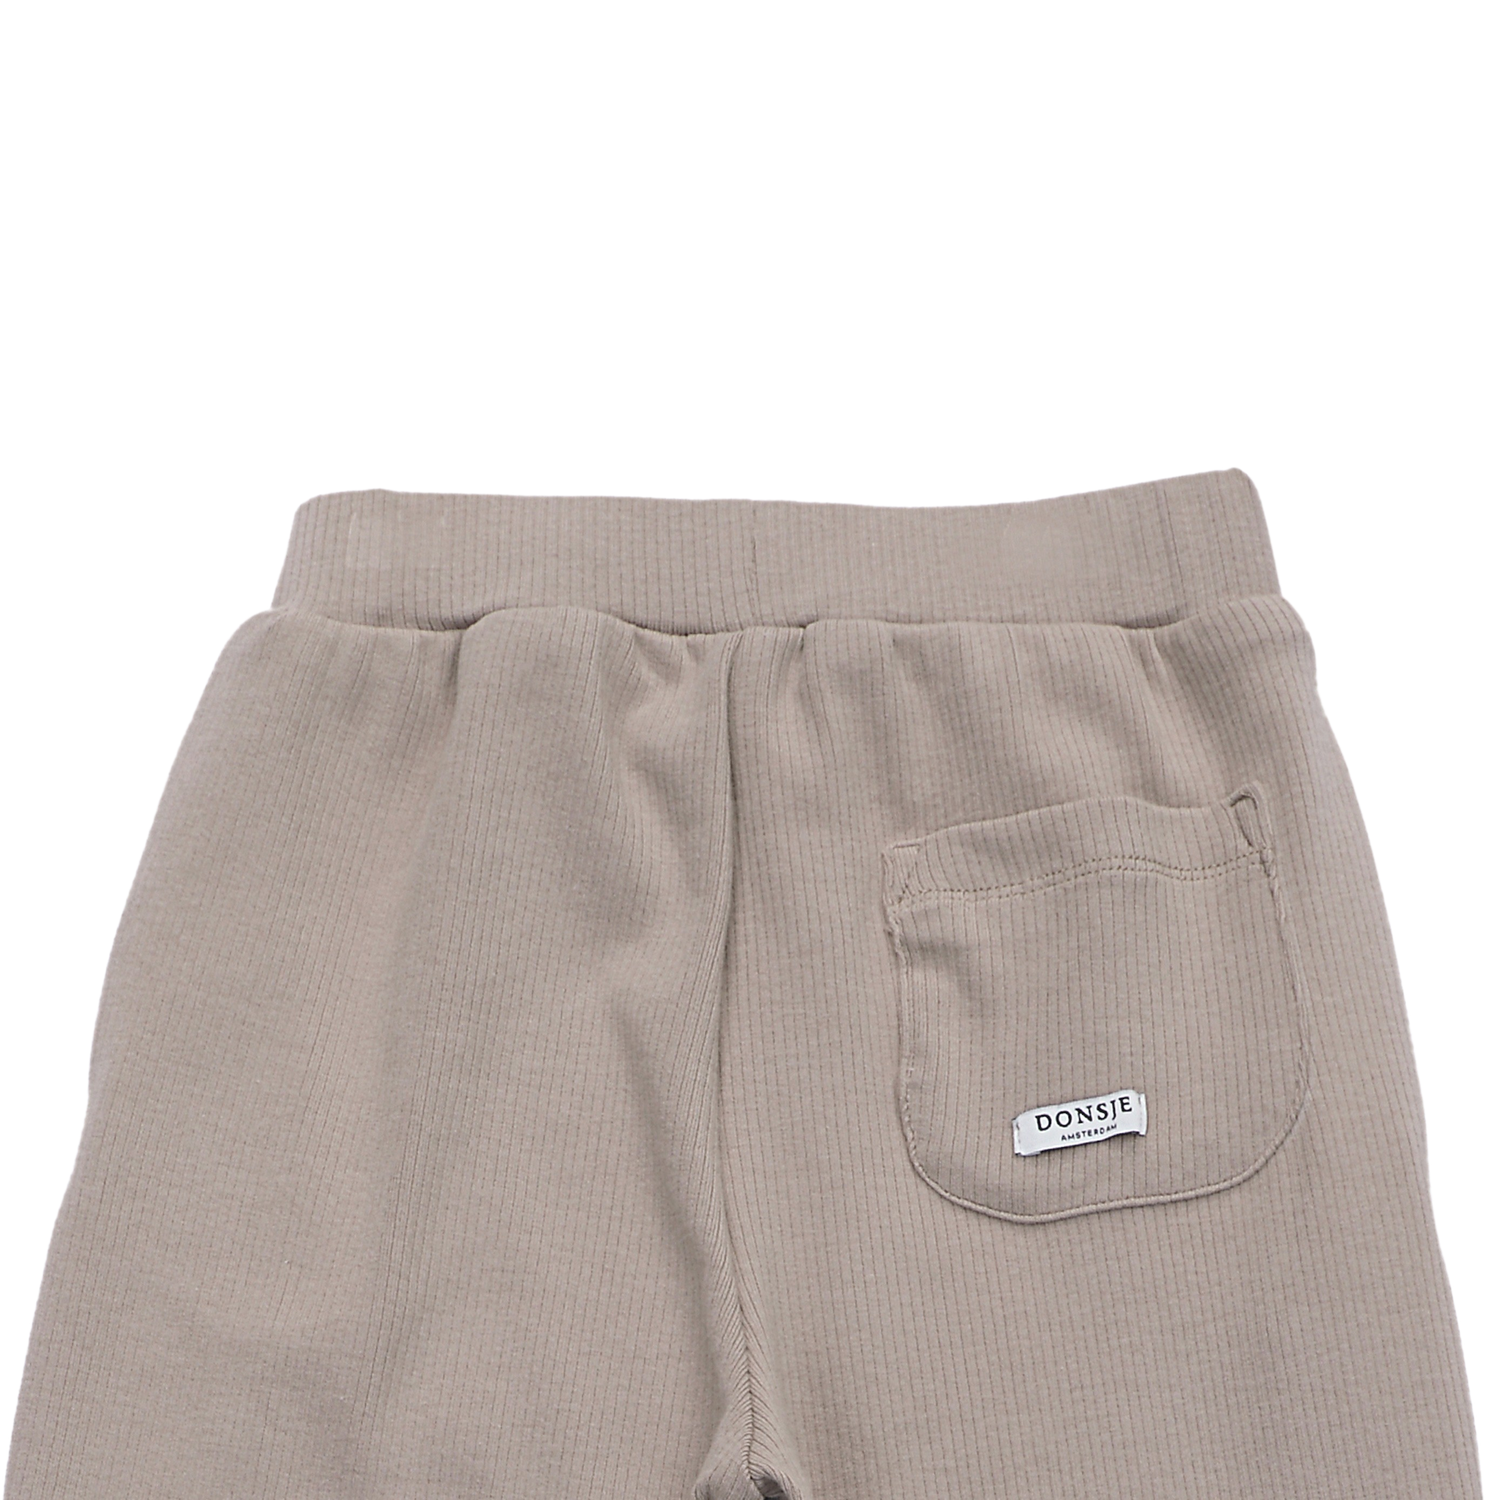 Silas Trousers | Dark Taupe